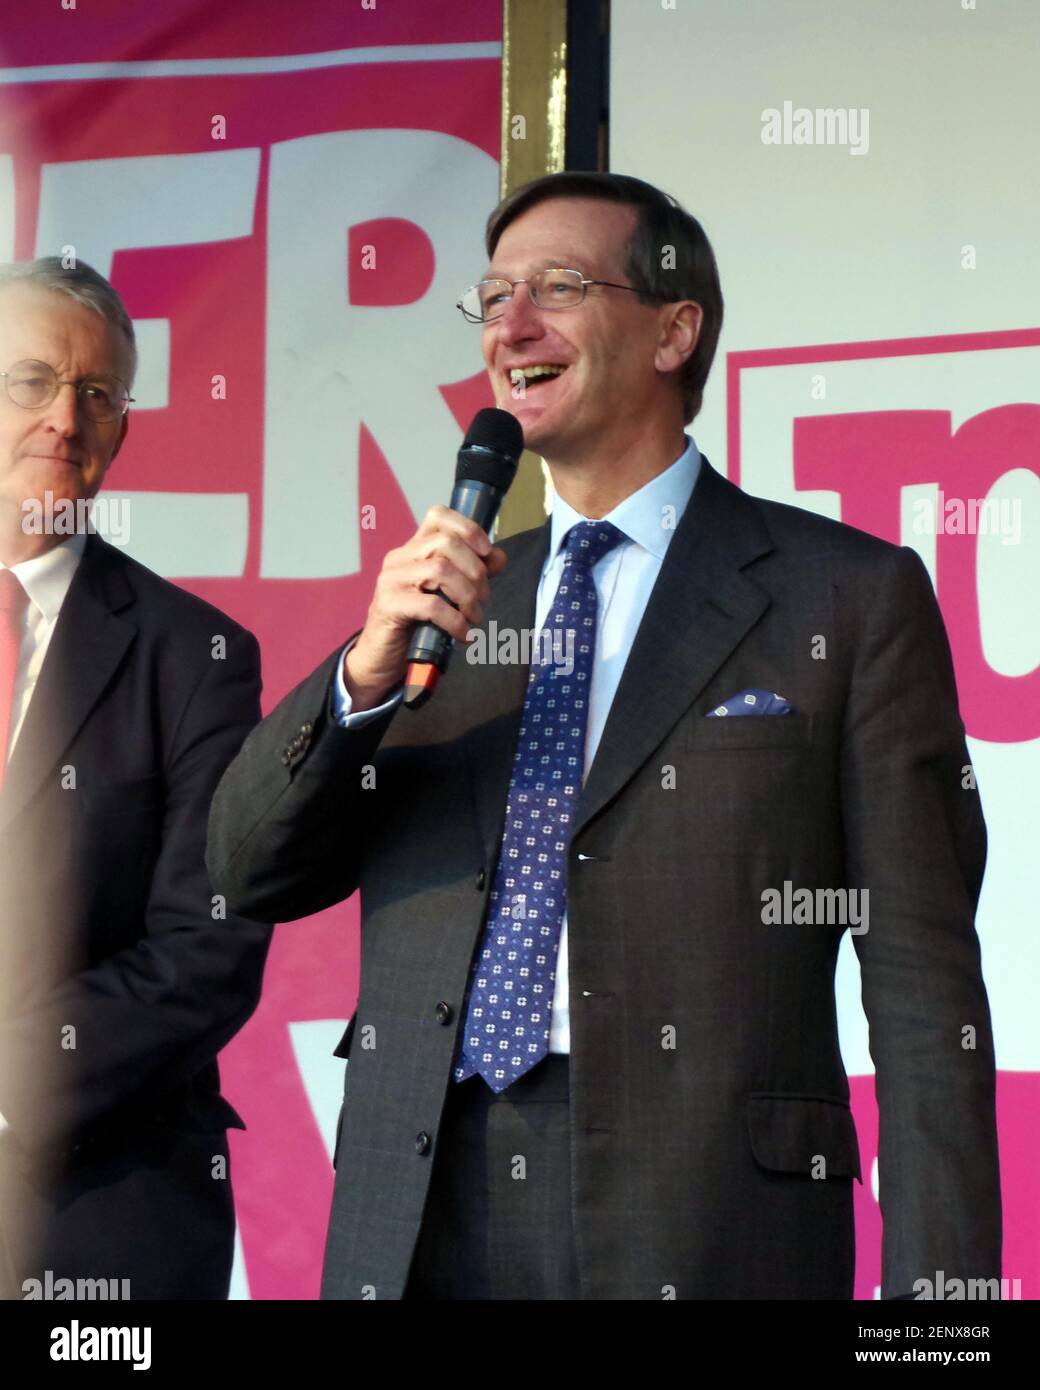 British barrister and former politician Dominic Grieve speaking at the third People's Vote March, Parliament Square, London, UK on 19 October 2019. Stock Photo